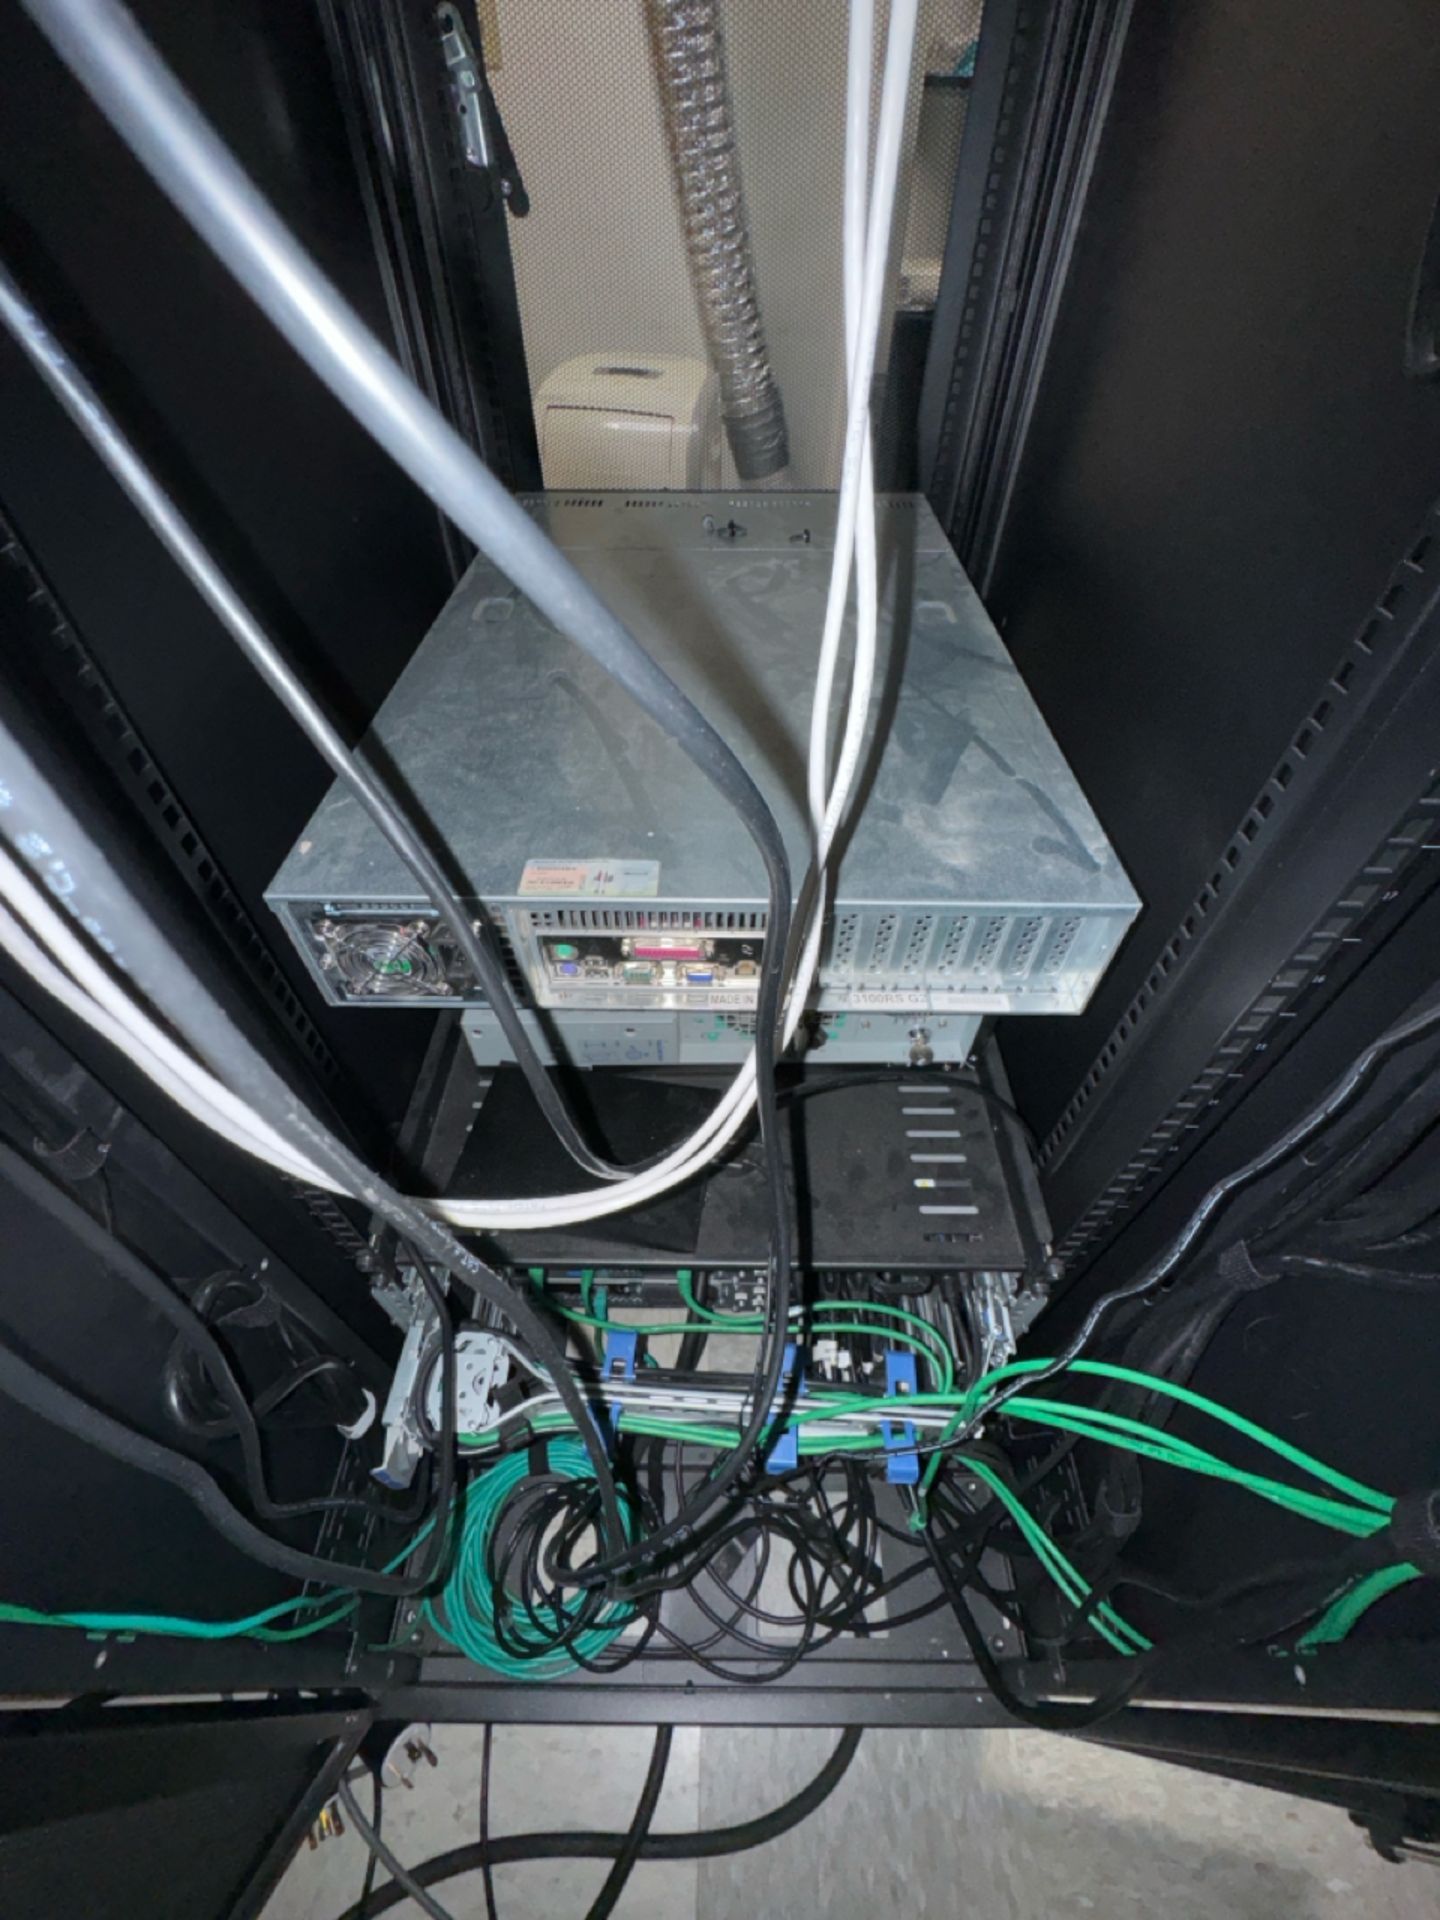 APC IT Tower Rack w/ Contents - Image 18 of 18